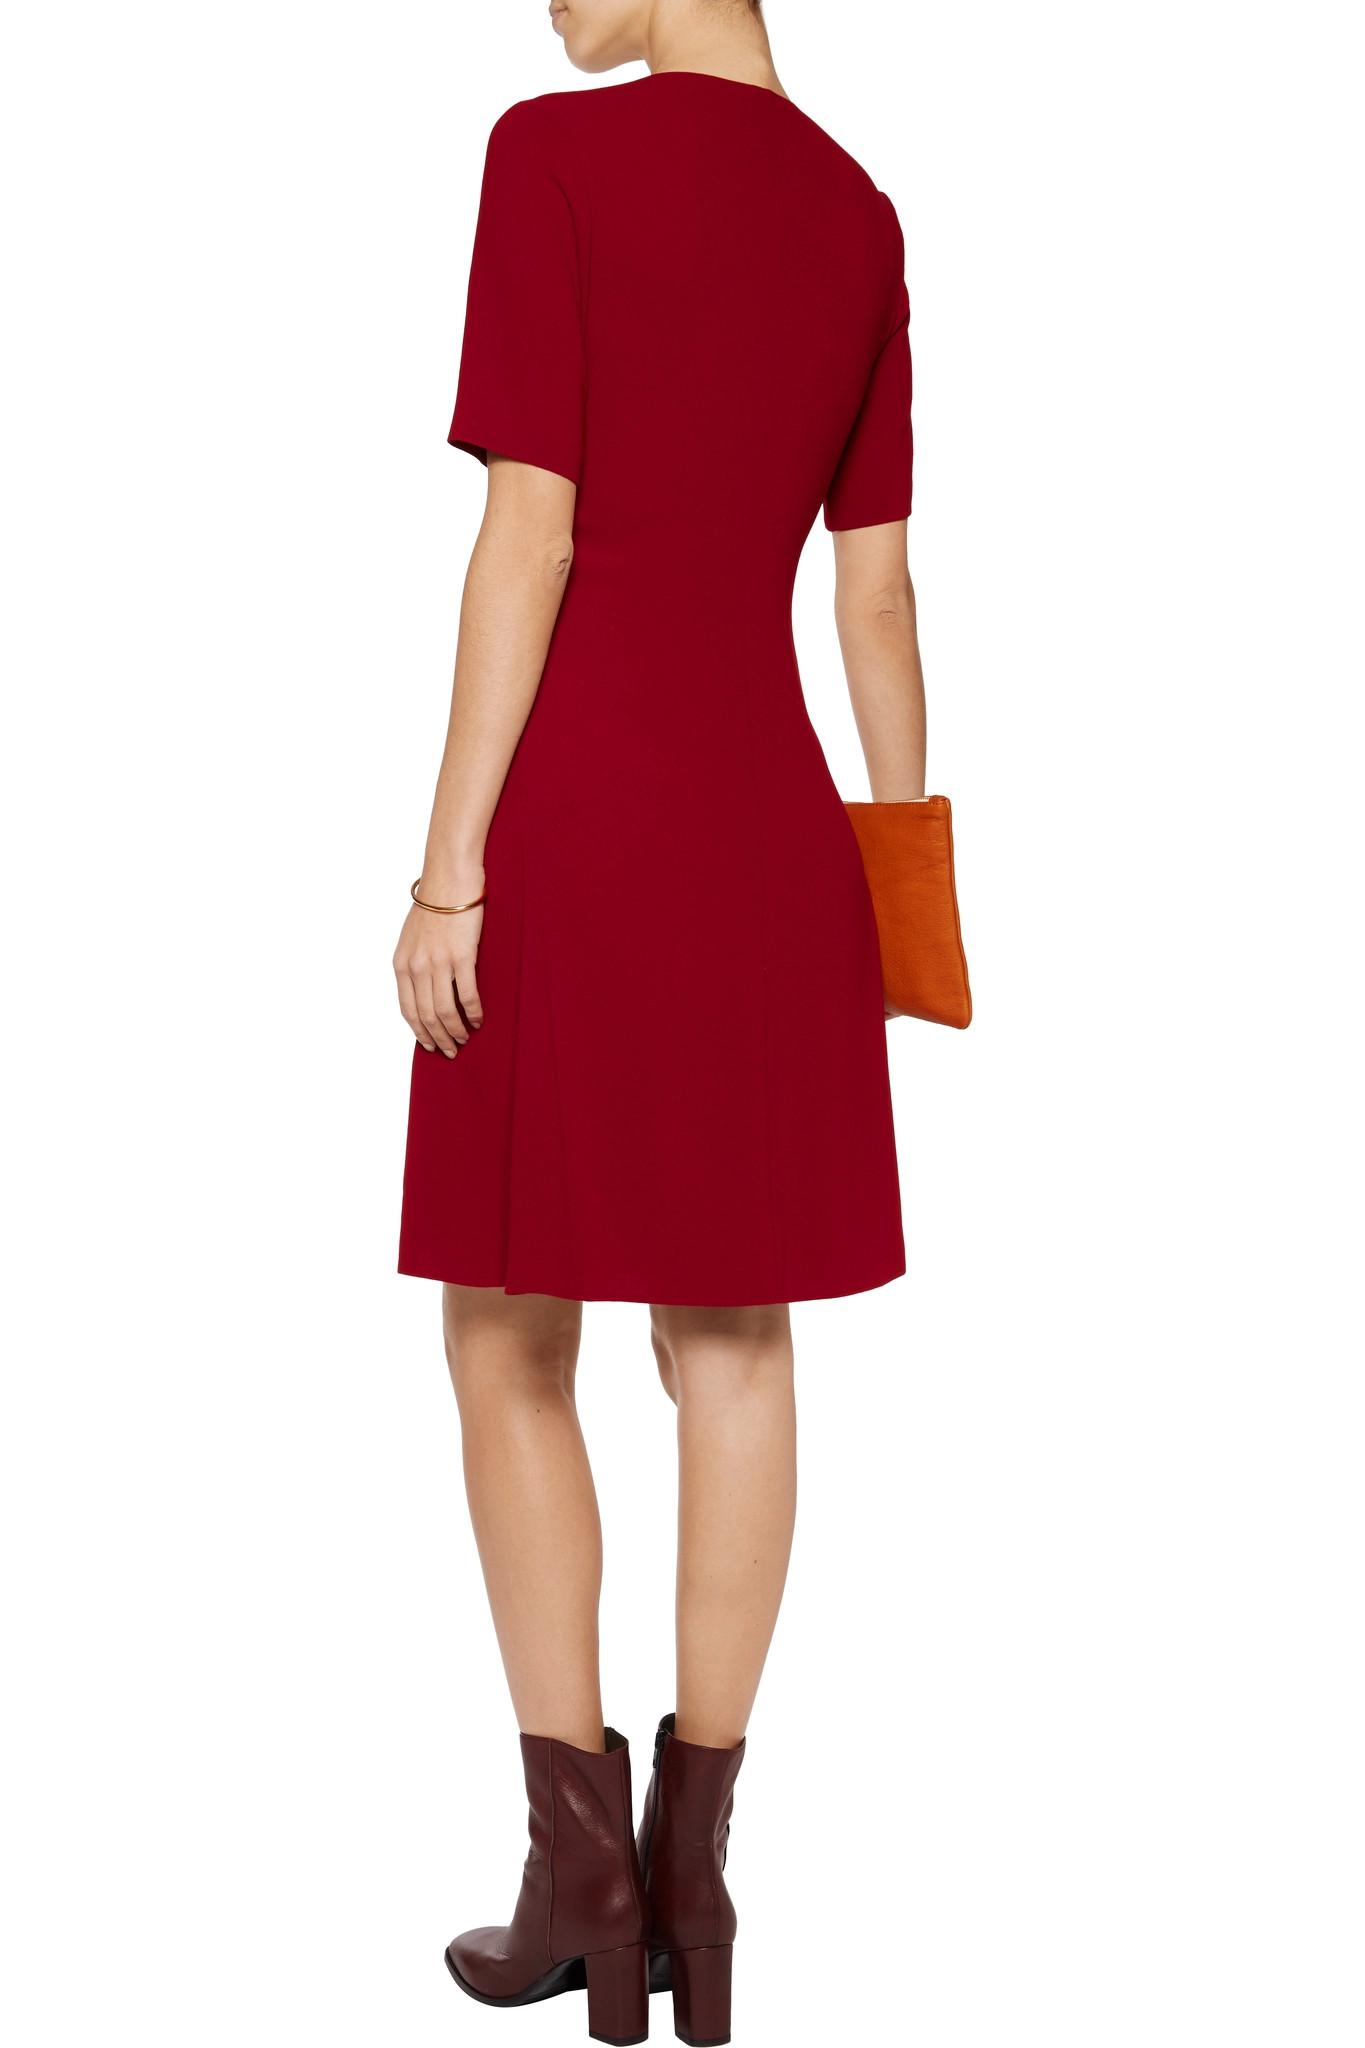 Lyst - Joseph Dolina Crepe Dress in Red